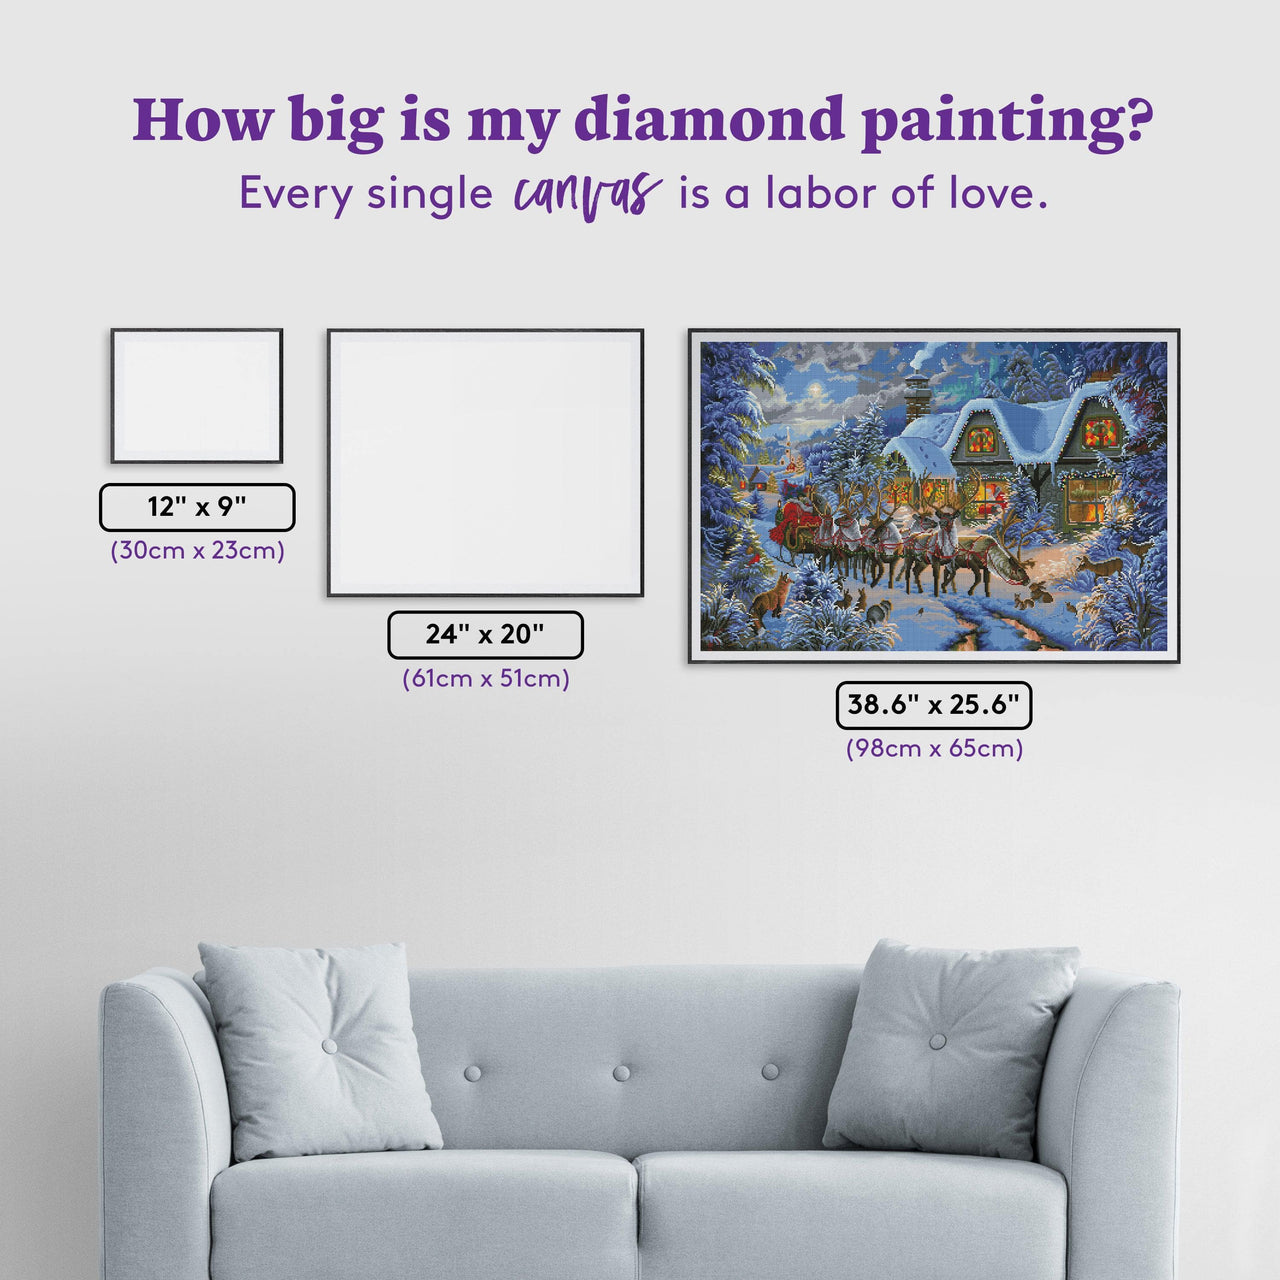 Diamond Painting Christmas Magic 38.6" x 25.6" (98cm x 65cm) / Square with 59 Colors including 4 ABs / 99,716